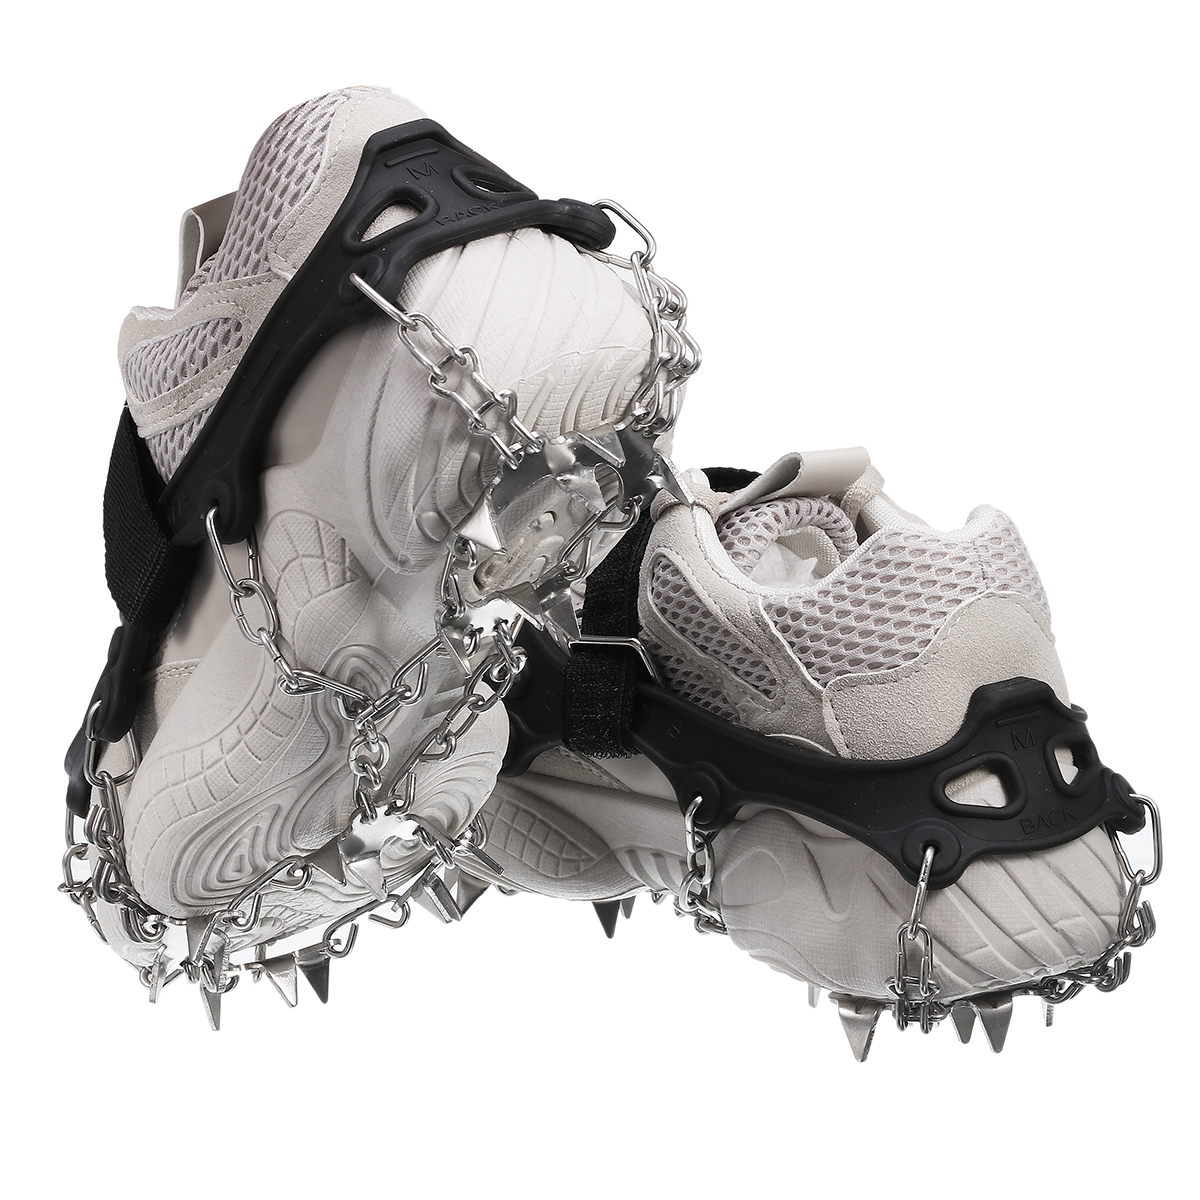 Audew-19-Spiked-Ice-Claw-Crampons-Grip-Mountaineering-Skis-Walking-Snow-Hiking-Shoes-Accessories-1886129-7